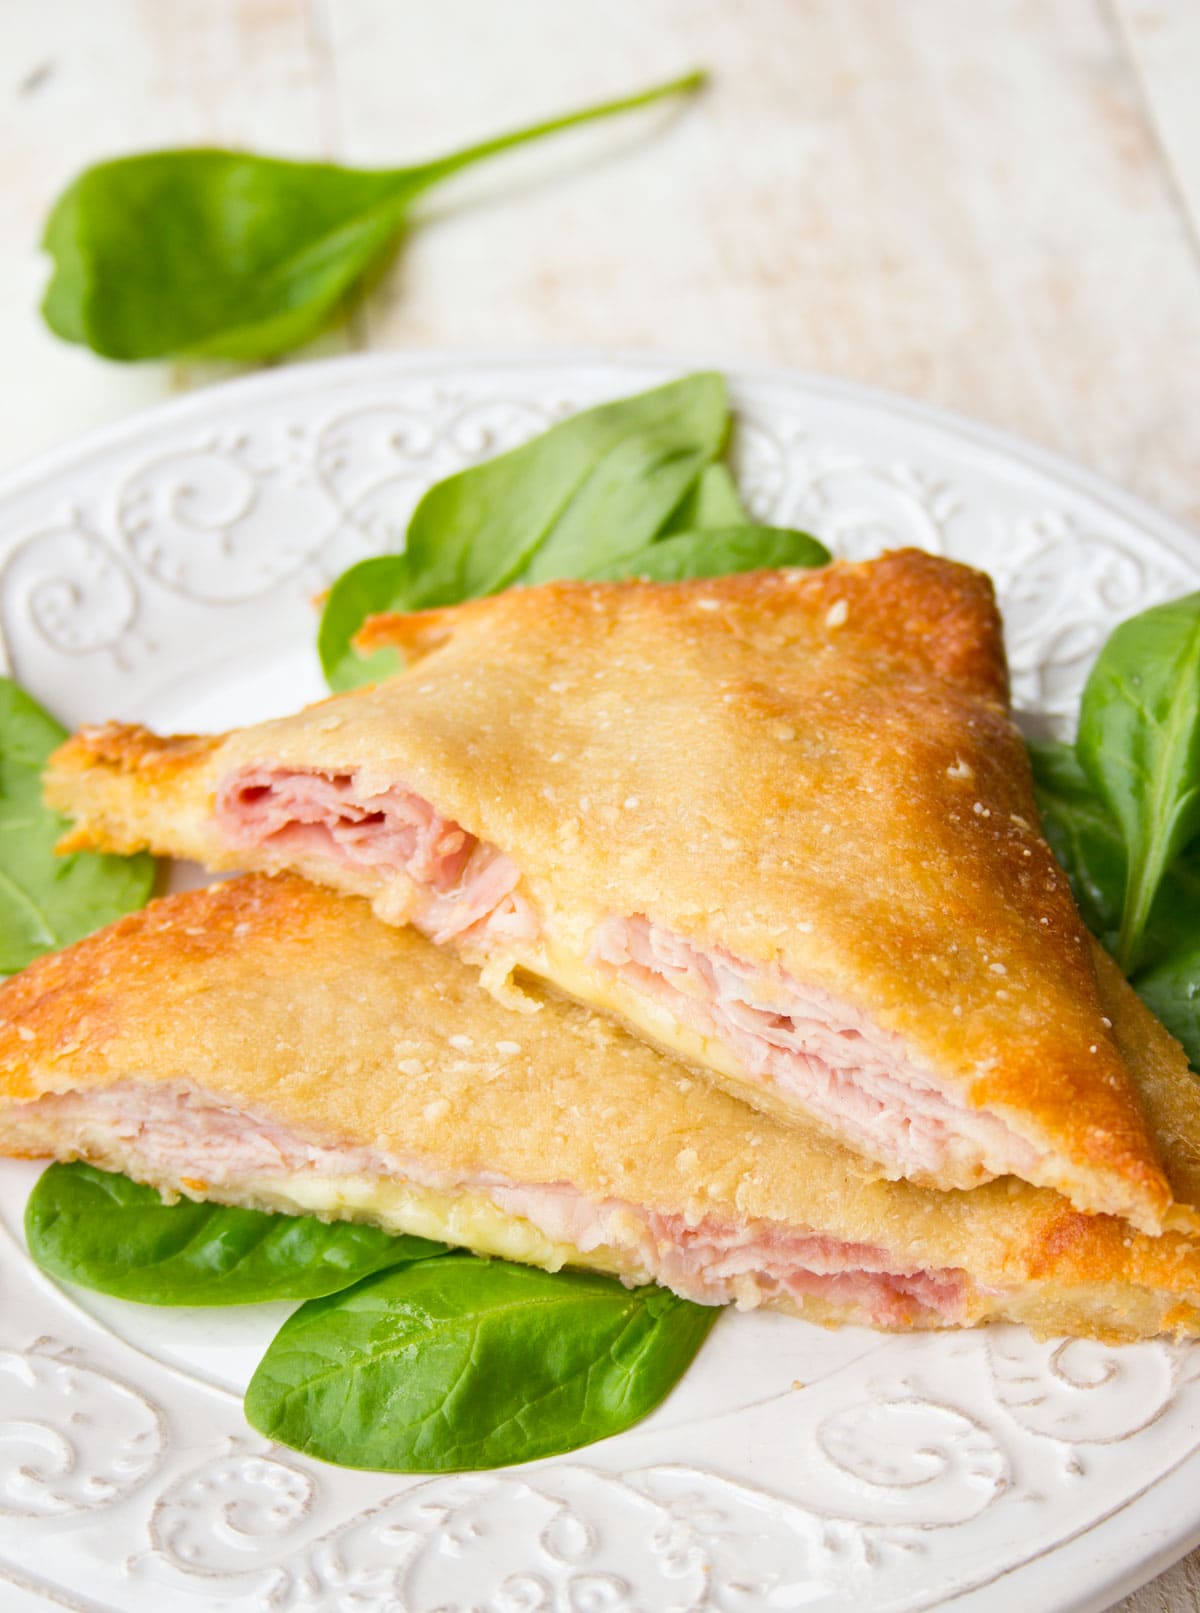 A keto croque monsieur sliced diagonally and filled with ham and cheese.